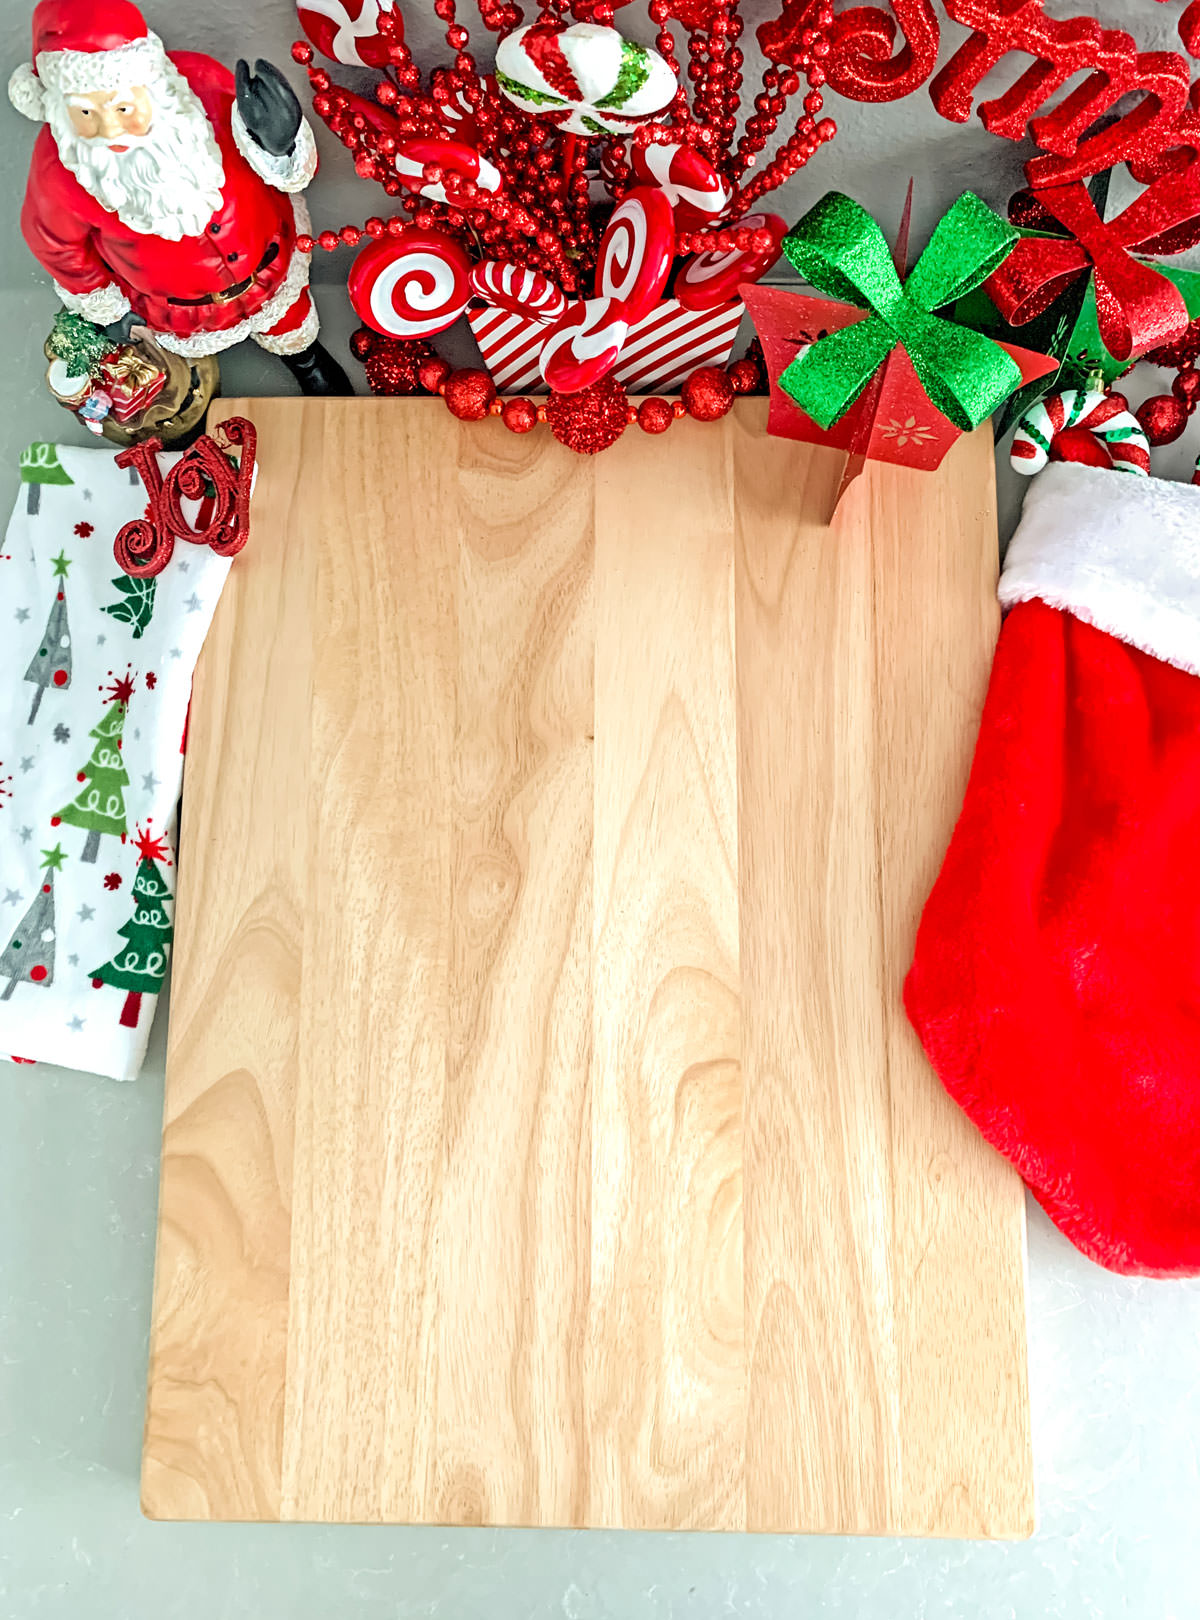 Closeup of a large wooden cutting board surrounded by a Christmas stocking, a Christmas kitchen towel and Christmas decorations.